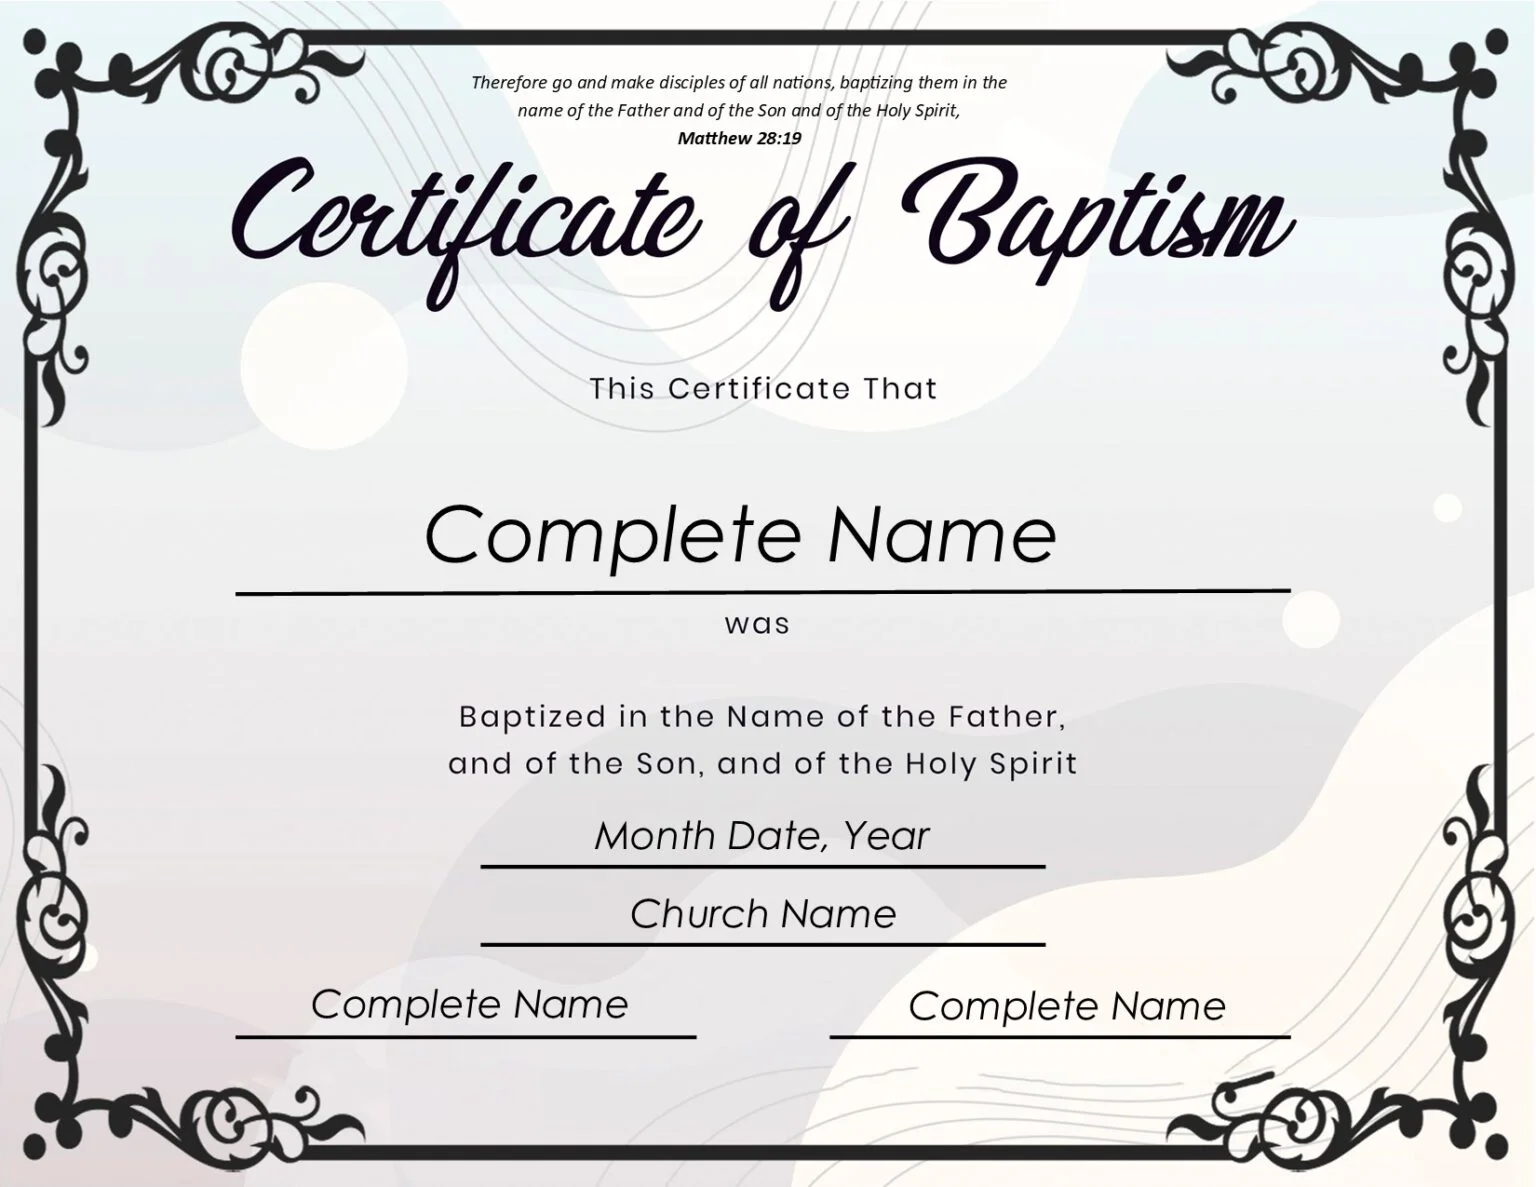 Baptismal Certificate - Free Baptism Certificate Template 3 by Ministry Voice